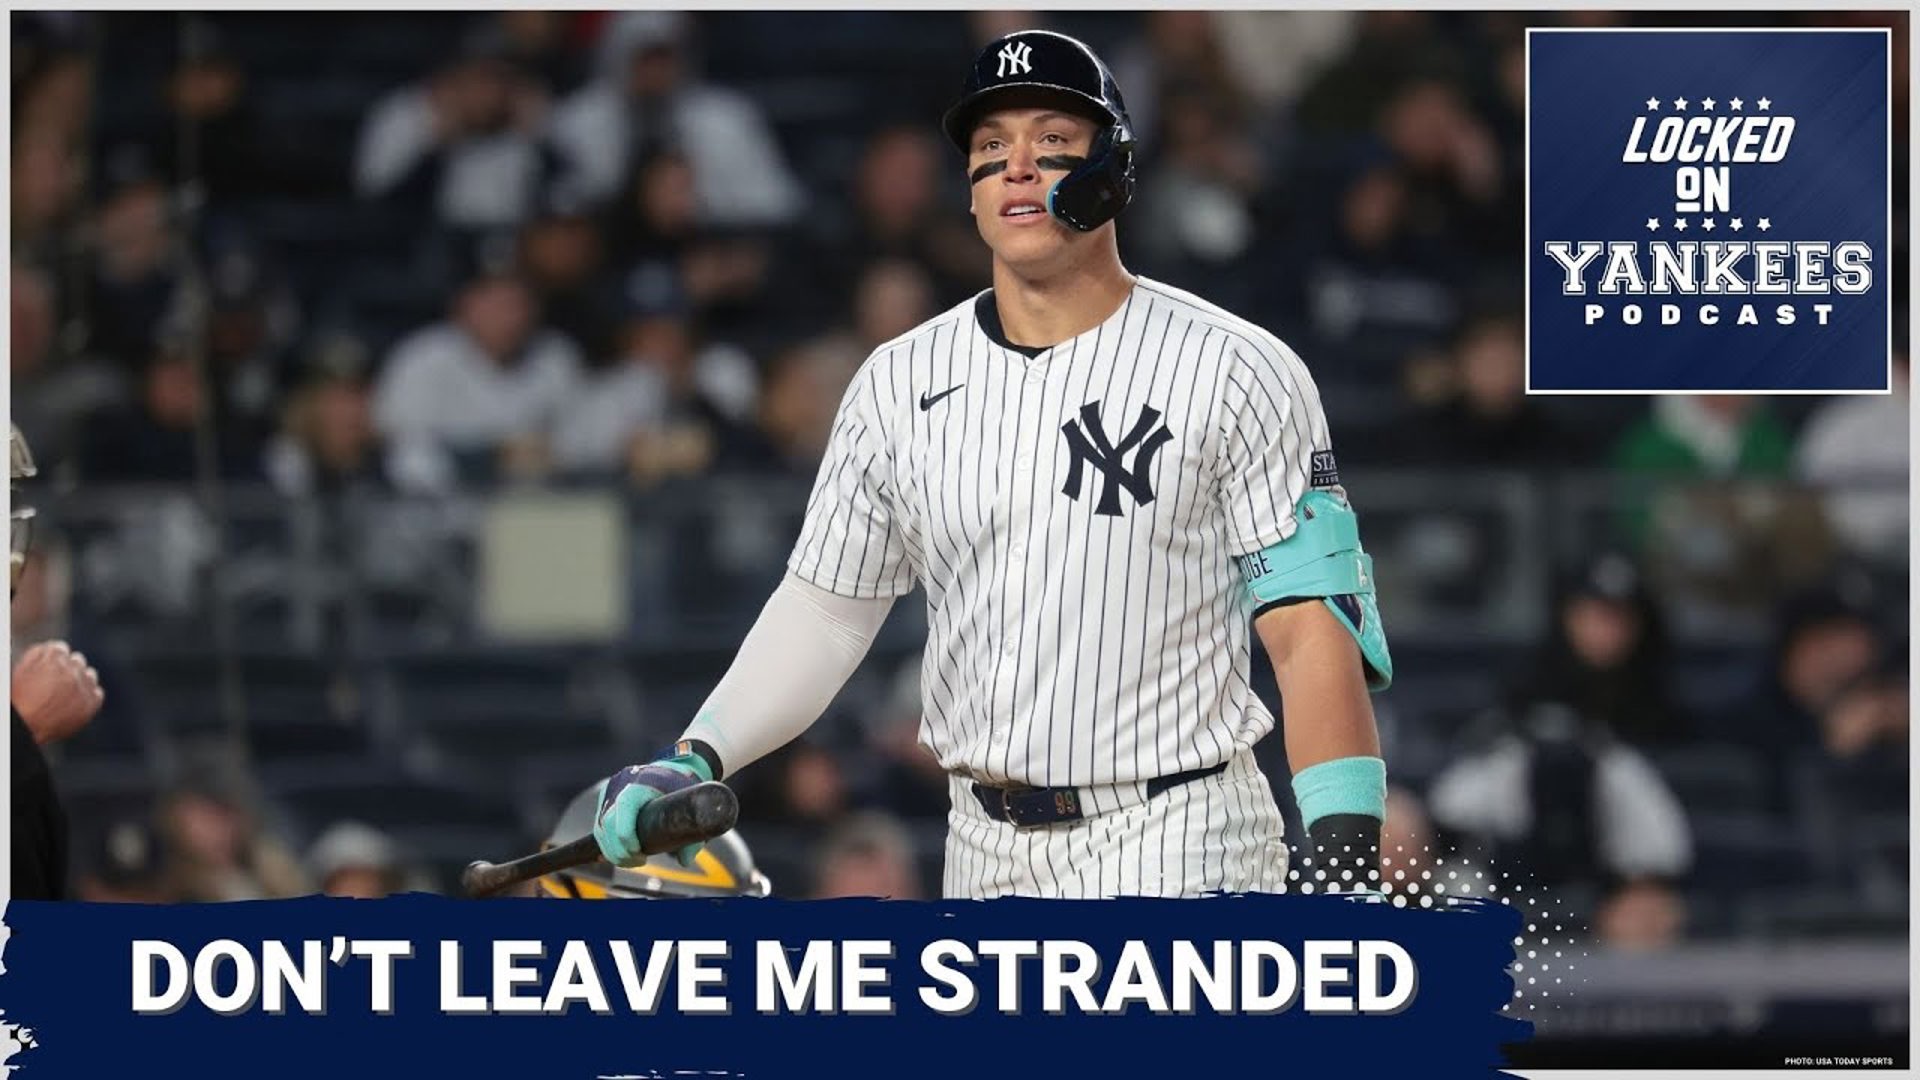 The New York Yankees dropped the series' last game to the A’s in frustrating fashion. Brian and Stacey discuss it briefly before getting into Fanmail Friday.